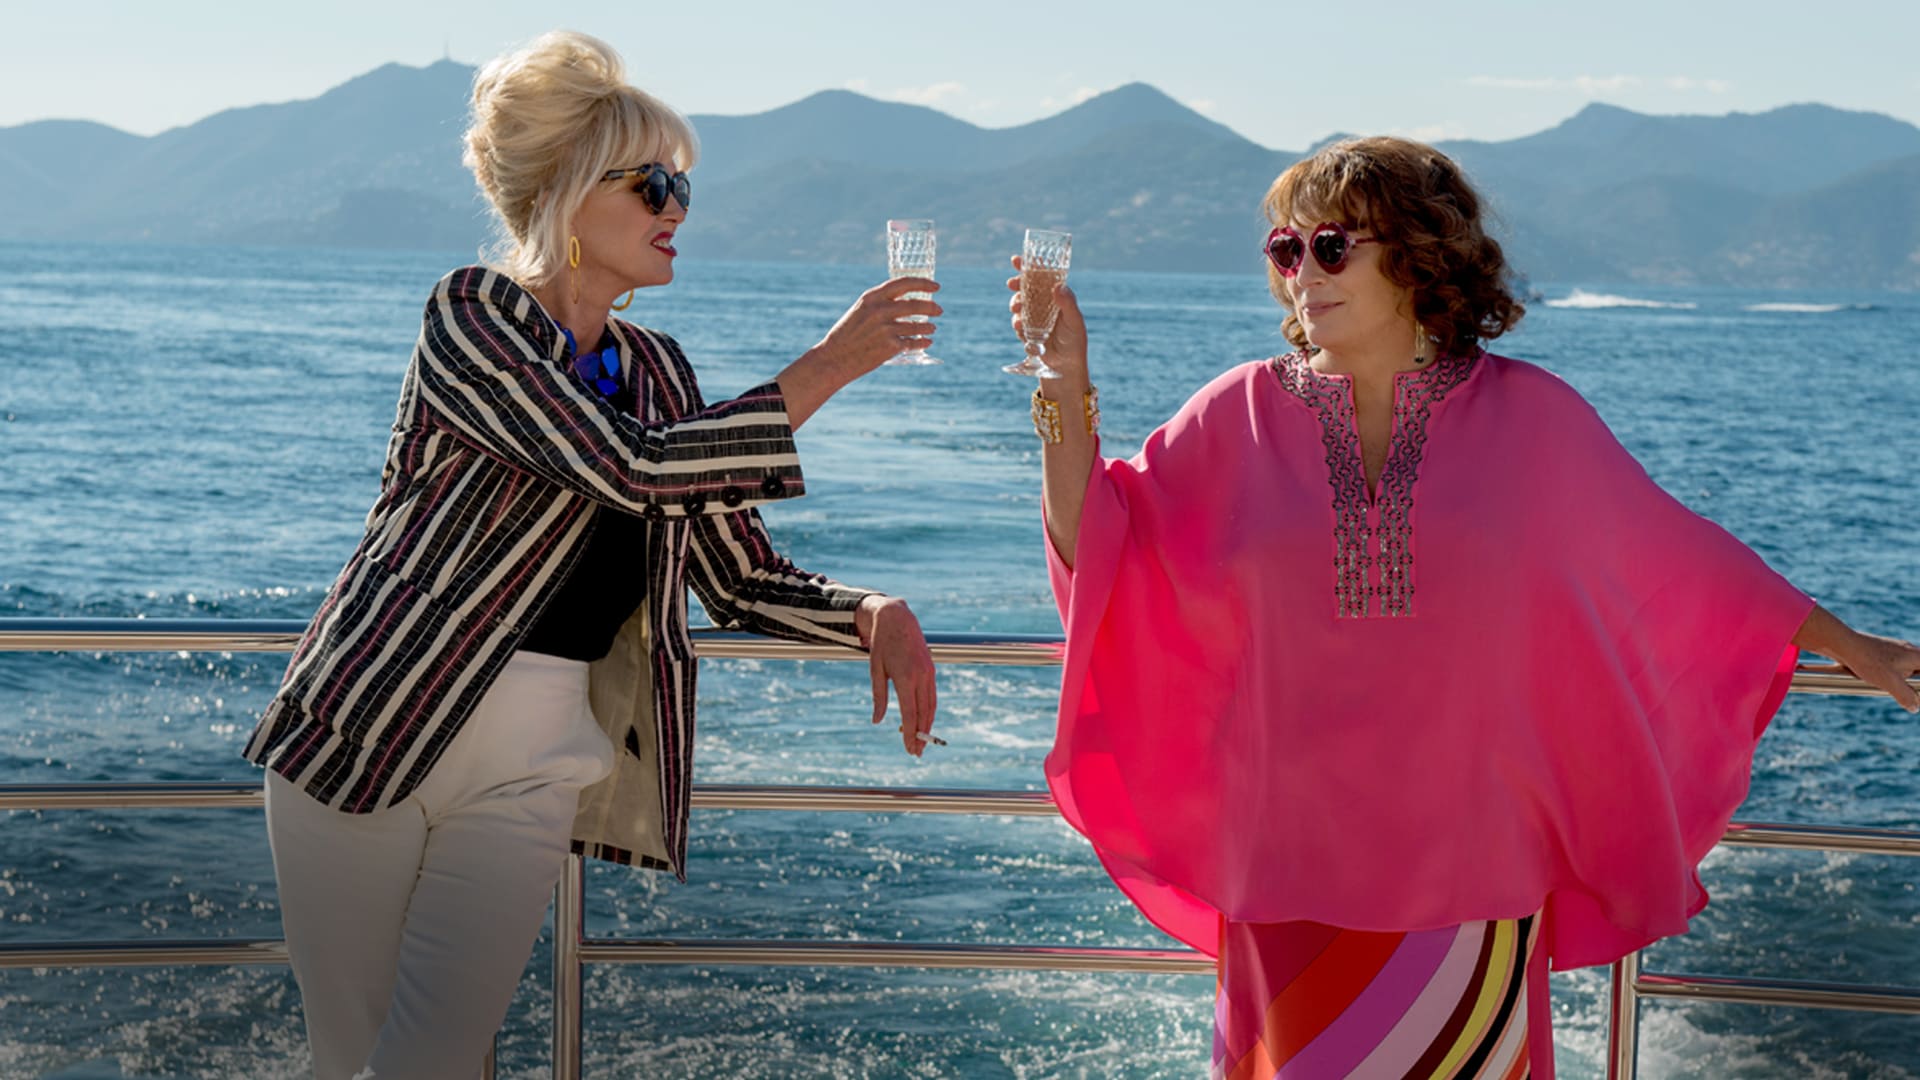 Absolutely Fabulous - Il film